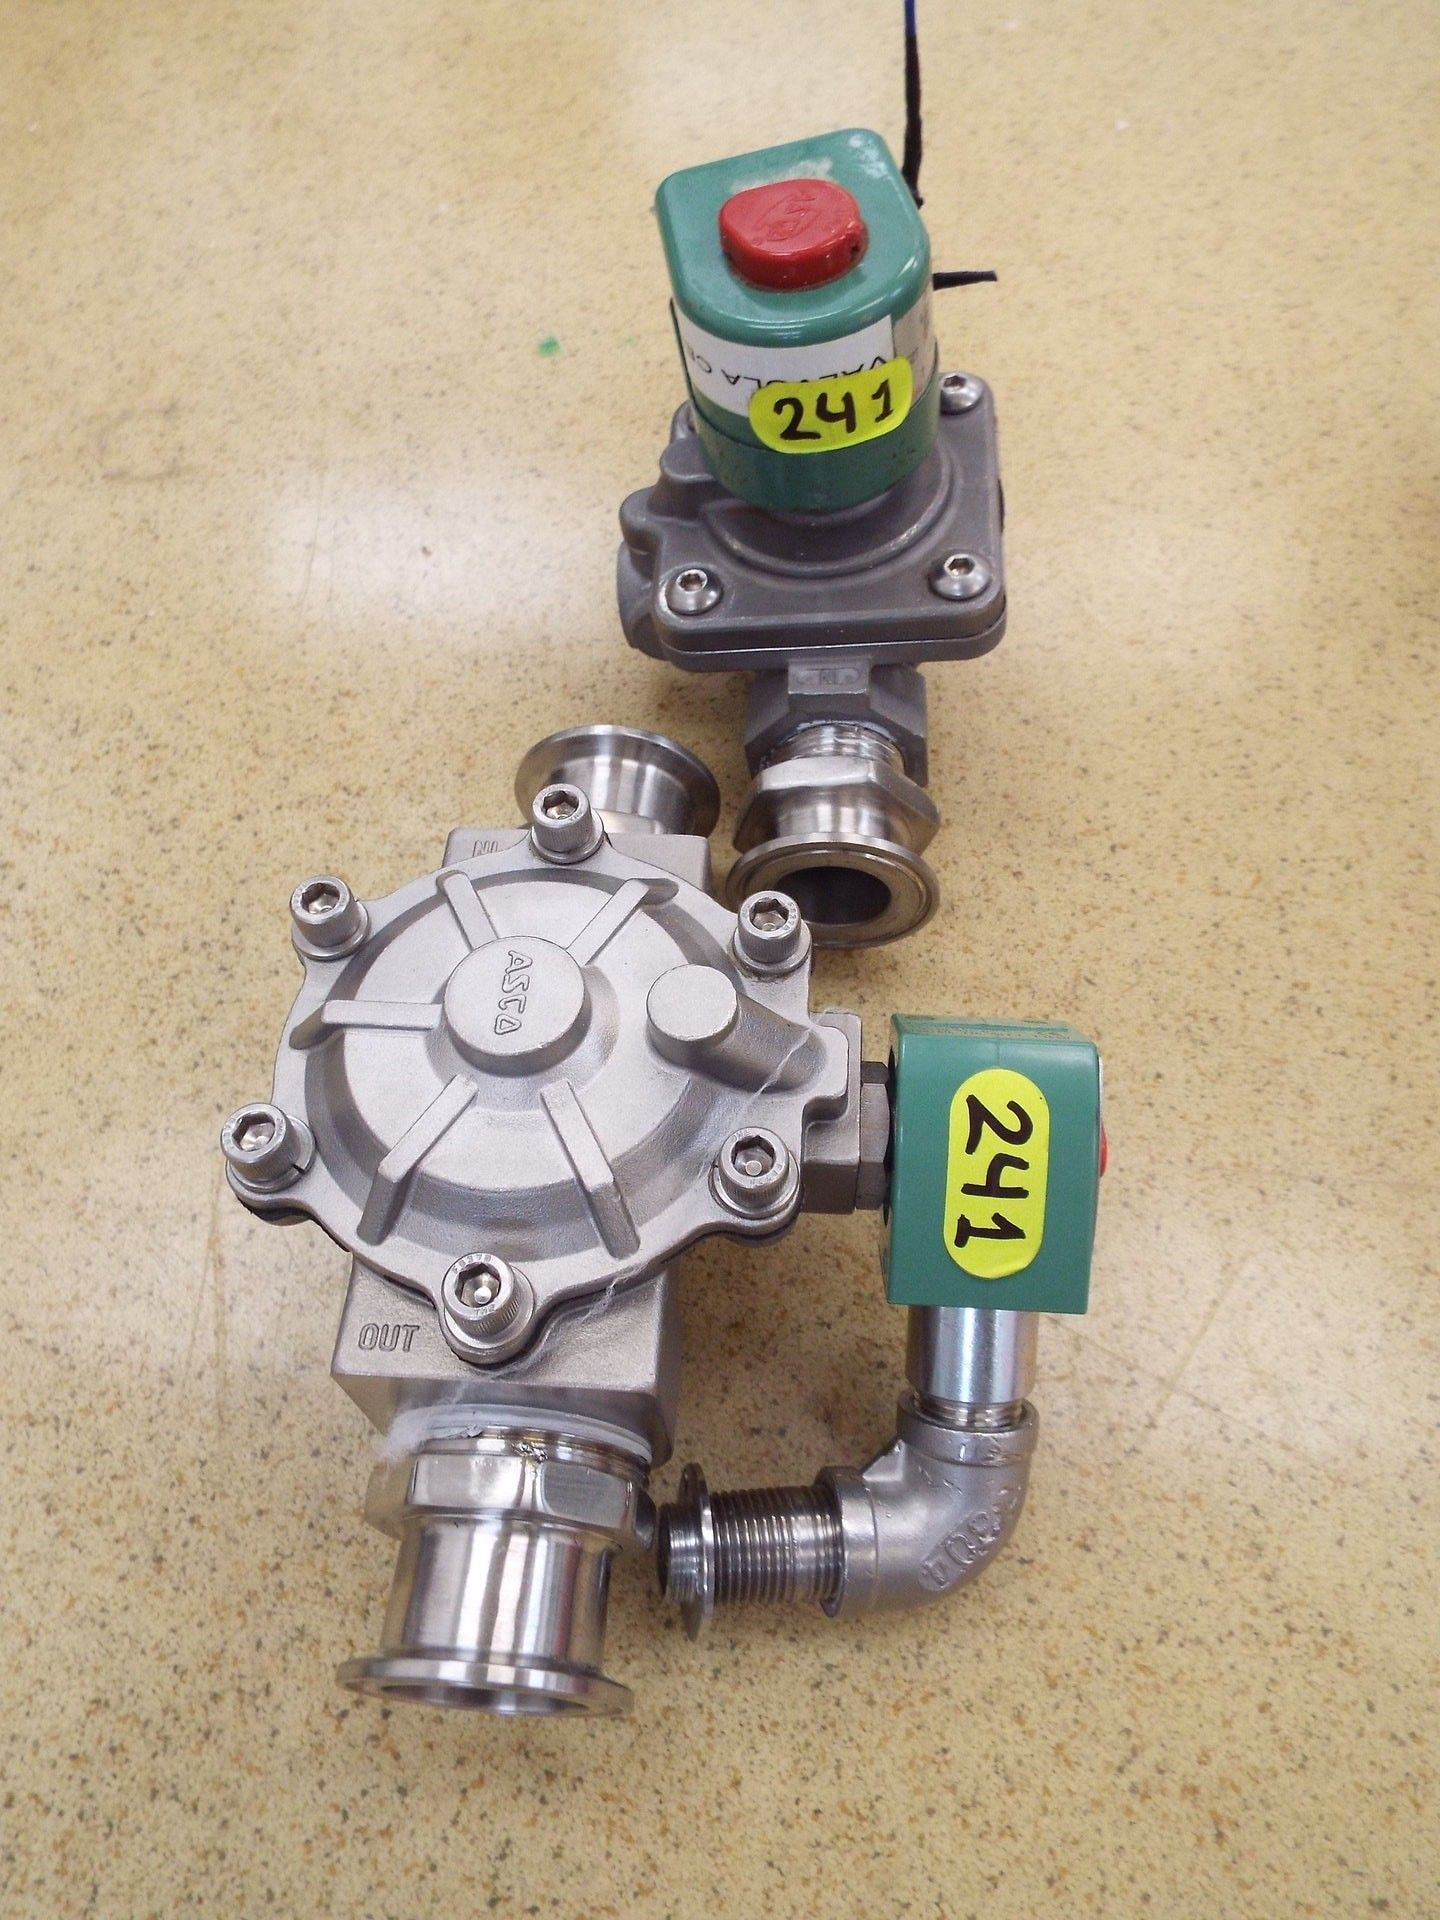 Stainless steel 1" electrovalve and regulator